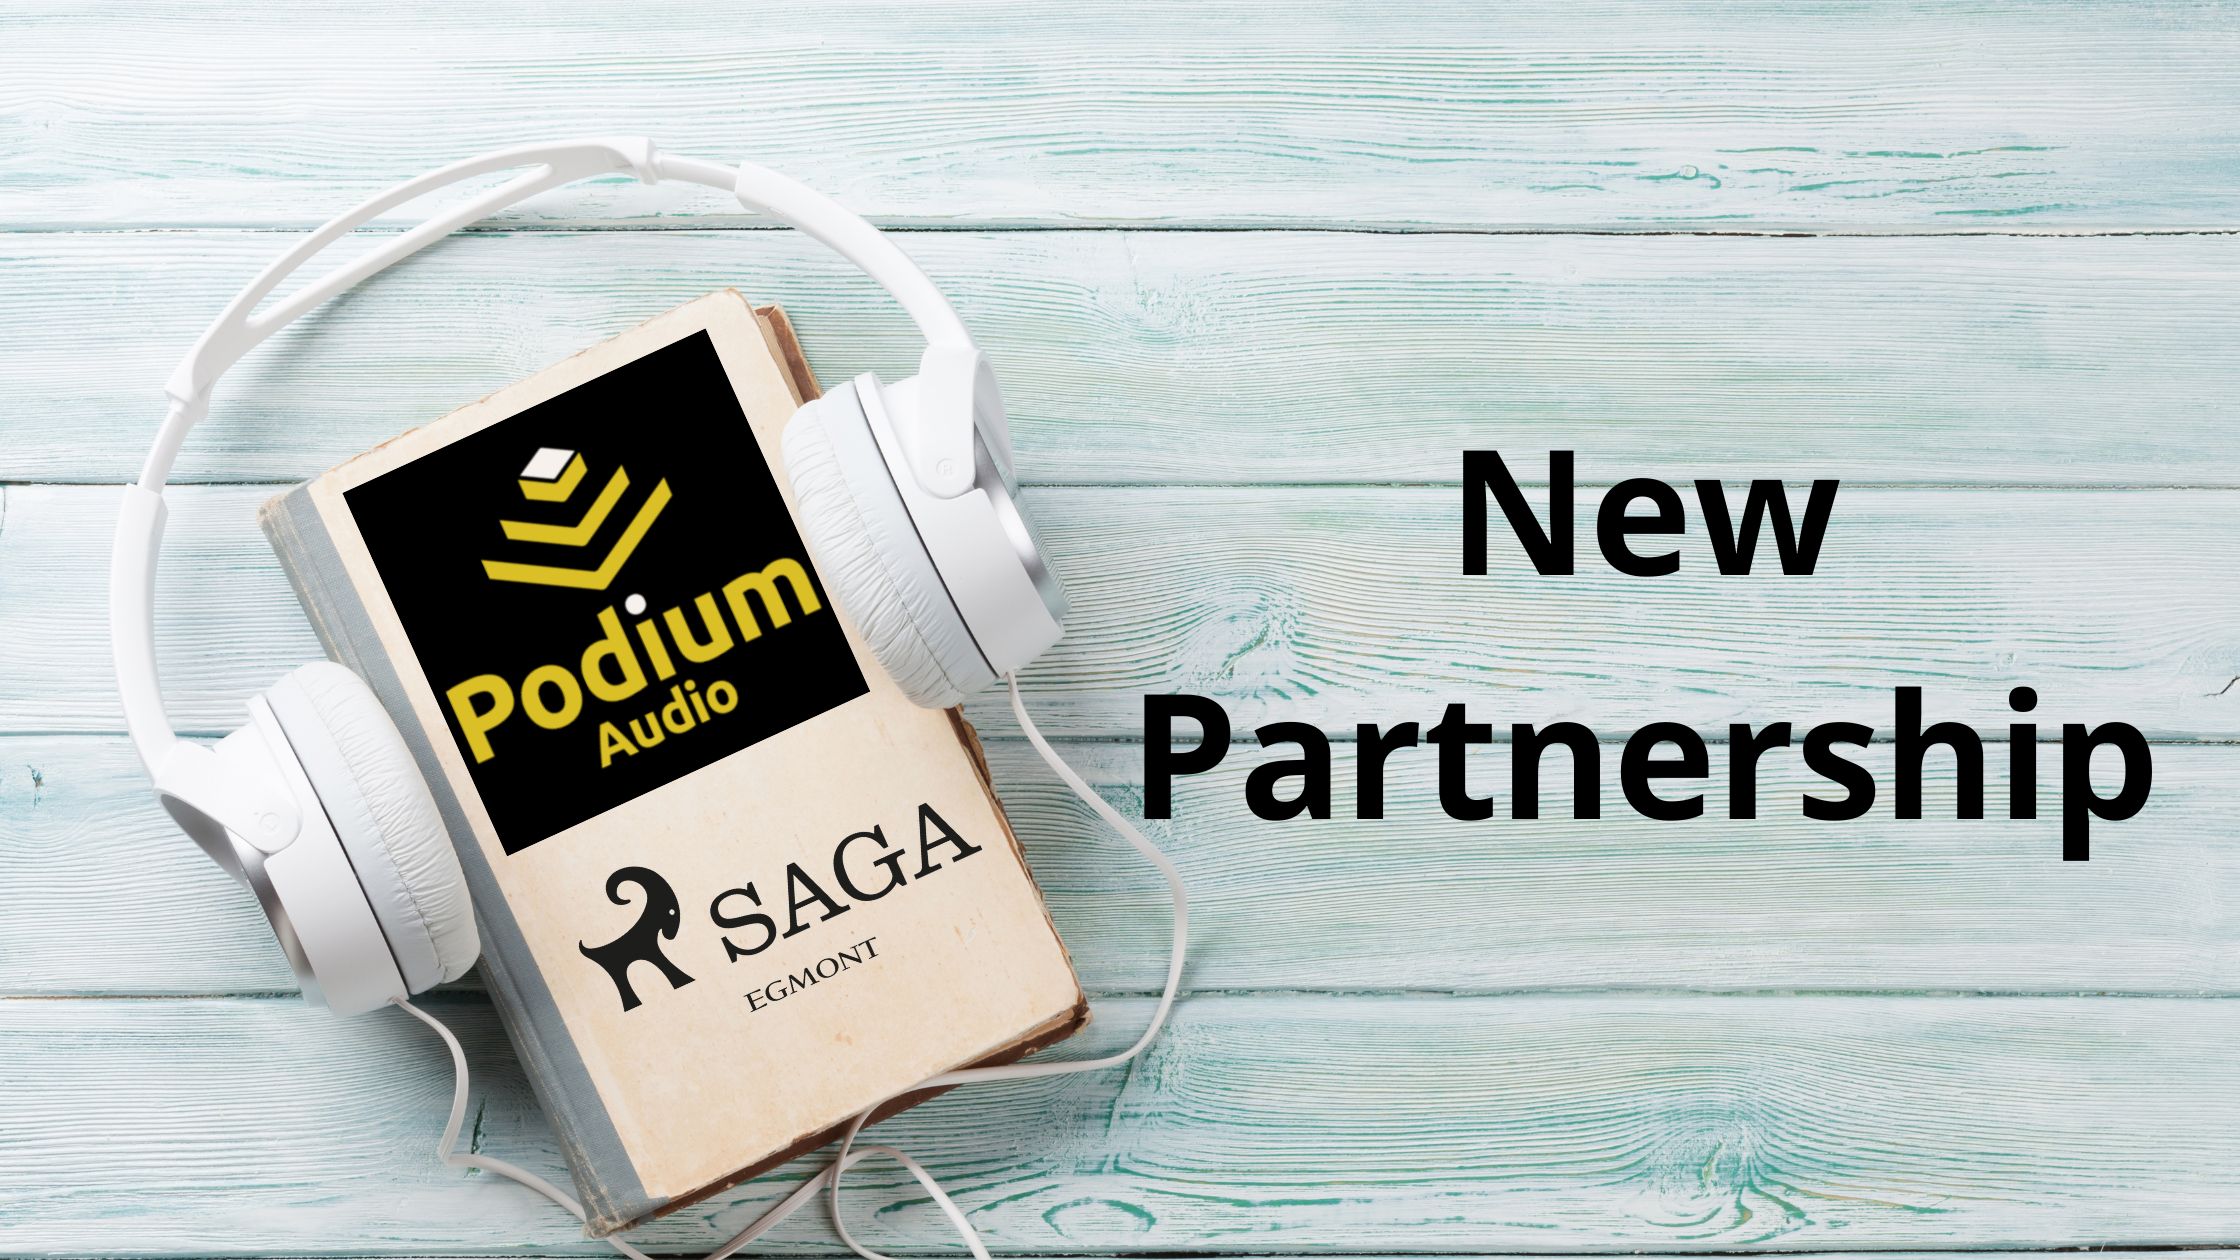 Ad Astra! Podium Audio and Saga Egmont Agreement on New Sci-Fi Catalogue in Five Languages